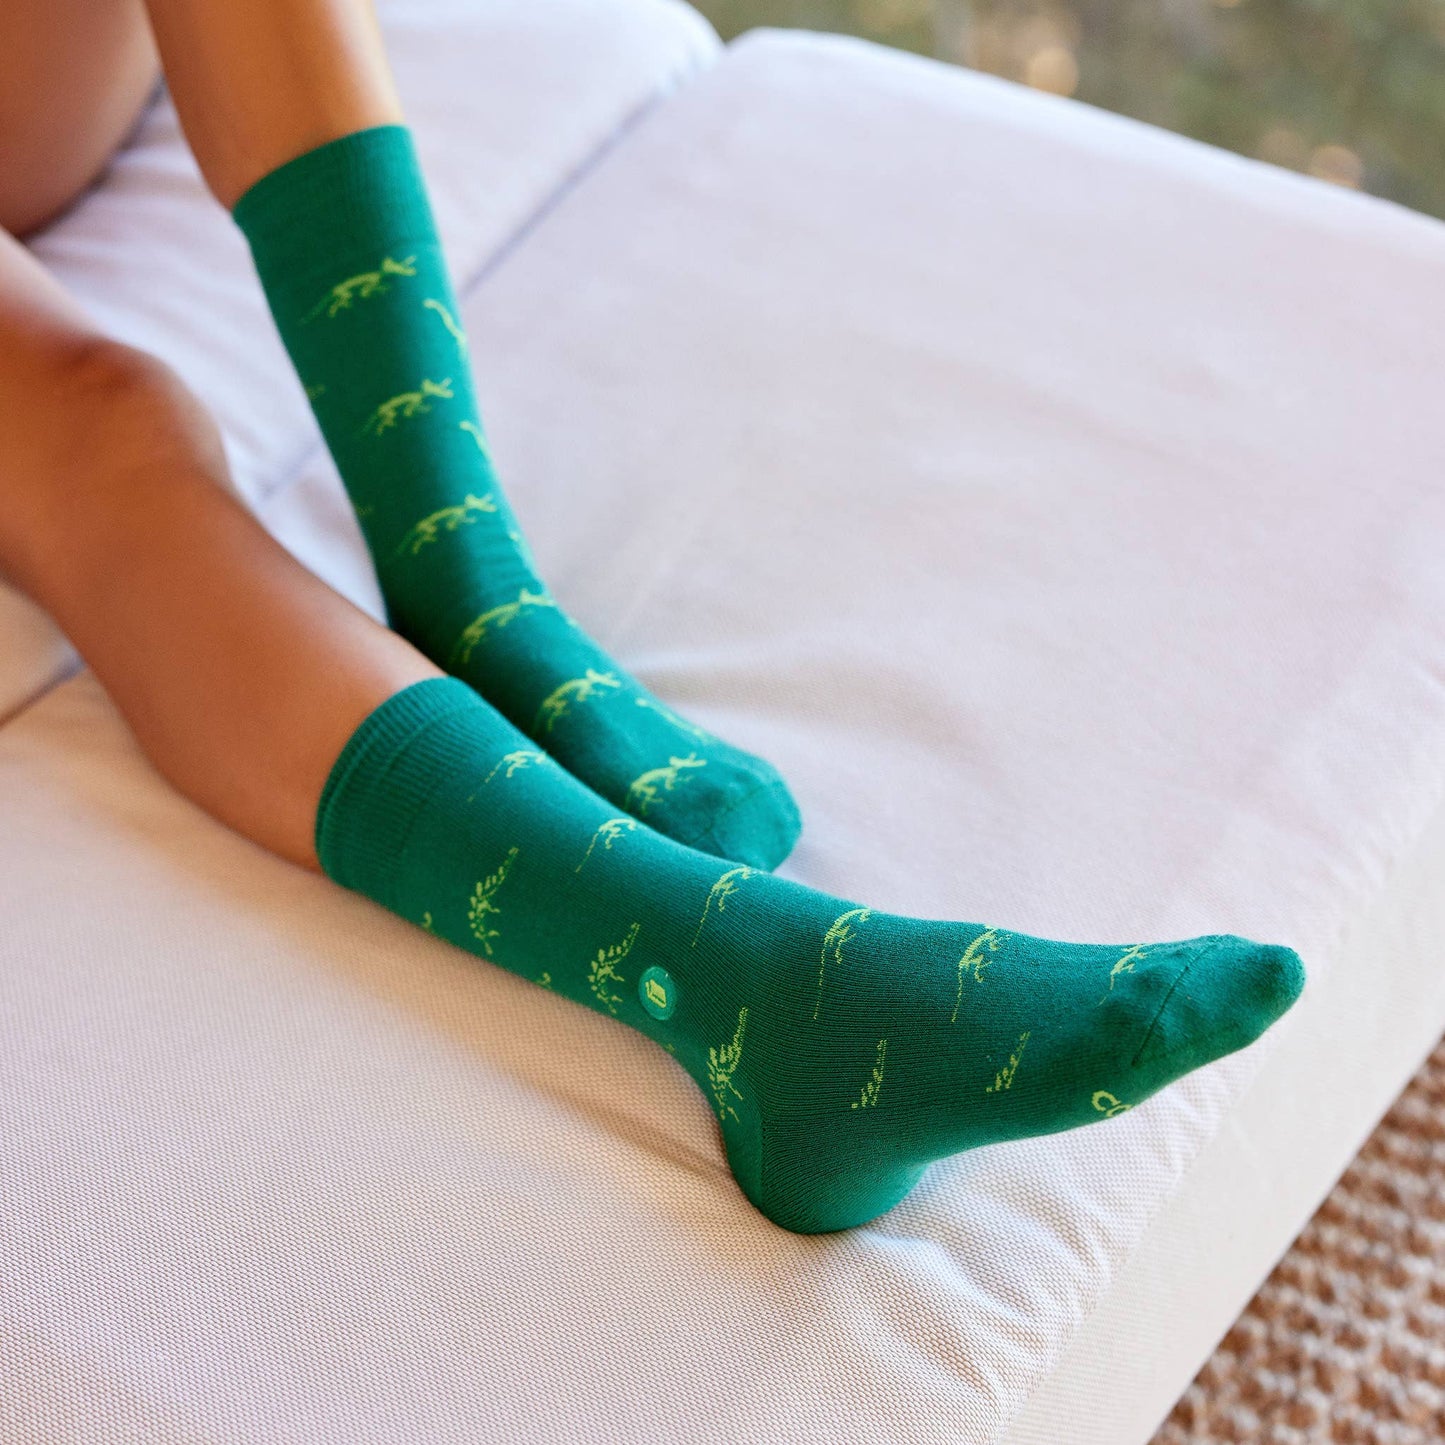 Socks that Give Books  (Green Dinosaurs): Small